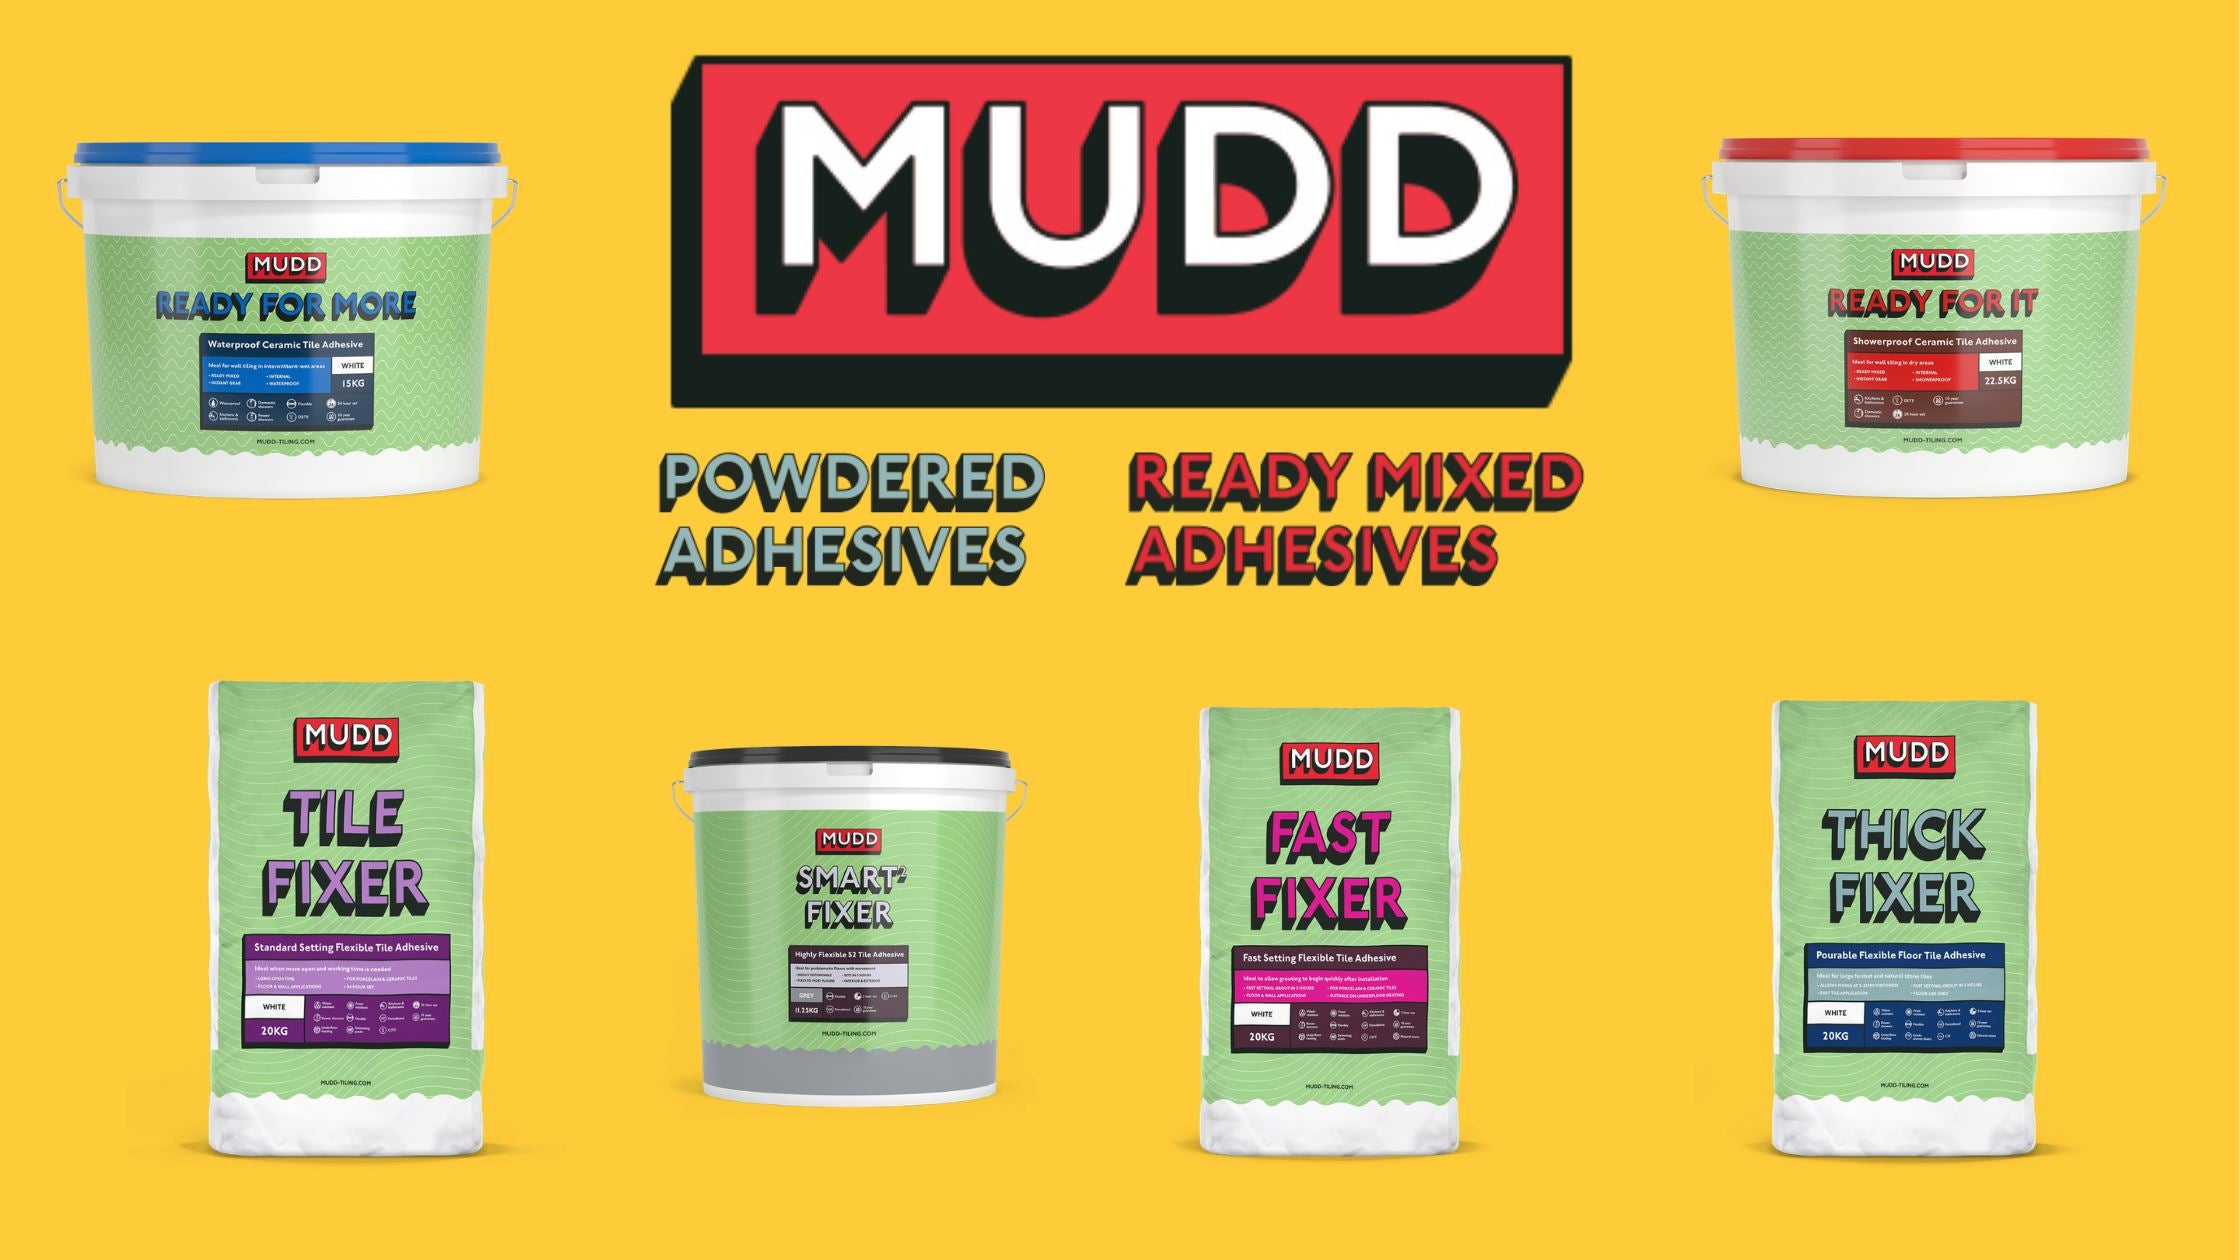 The Mudd Series Part 2: It's Adhesive Time